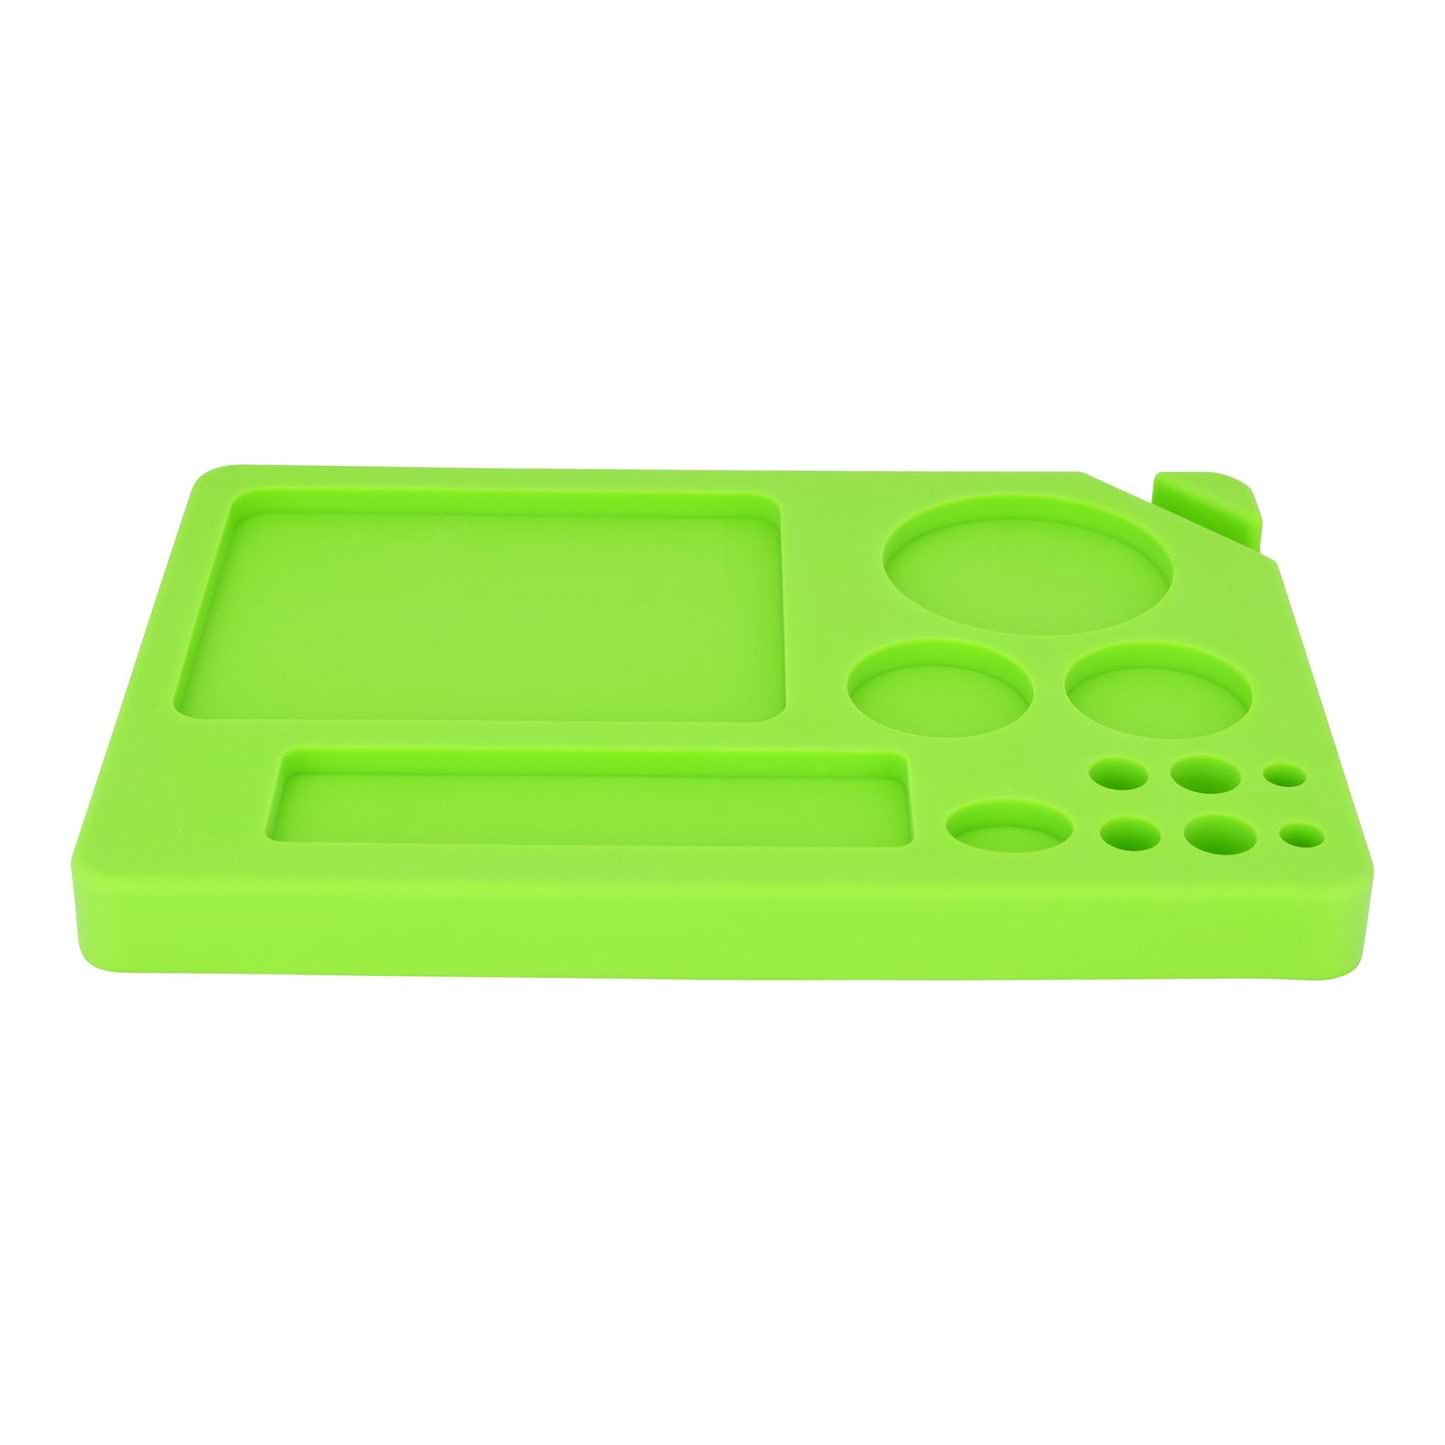 Buy Yullmu Silicone Dab Mats for Wax 12X8.5 Inches Pad Wax Mat Metal Tray,  Portable Tray, Stylish Rolling Tray，1Mats+1Metal Tray Online at Low Prices  in India - .in